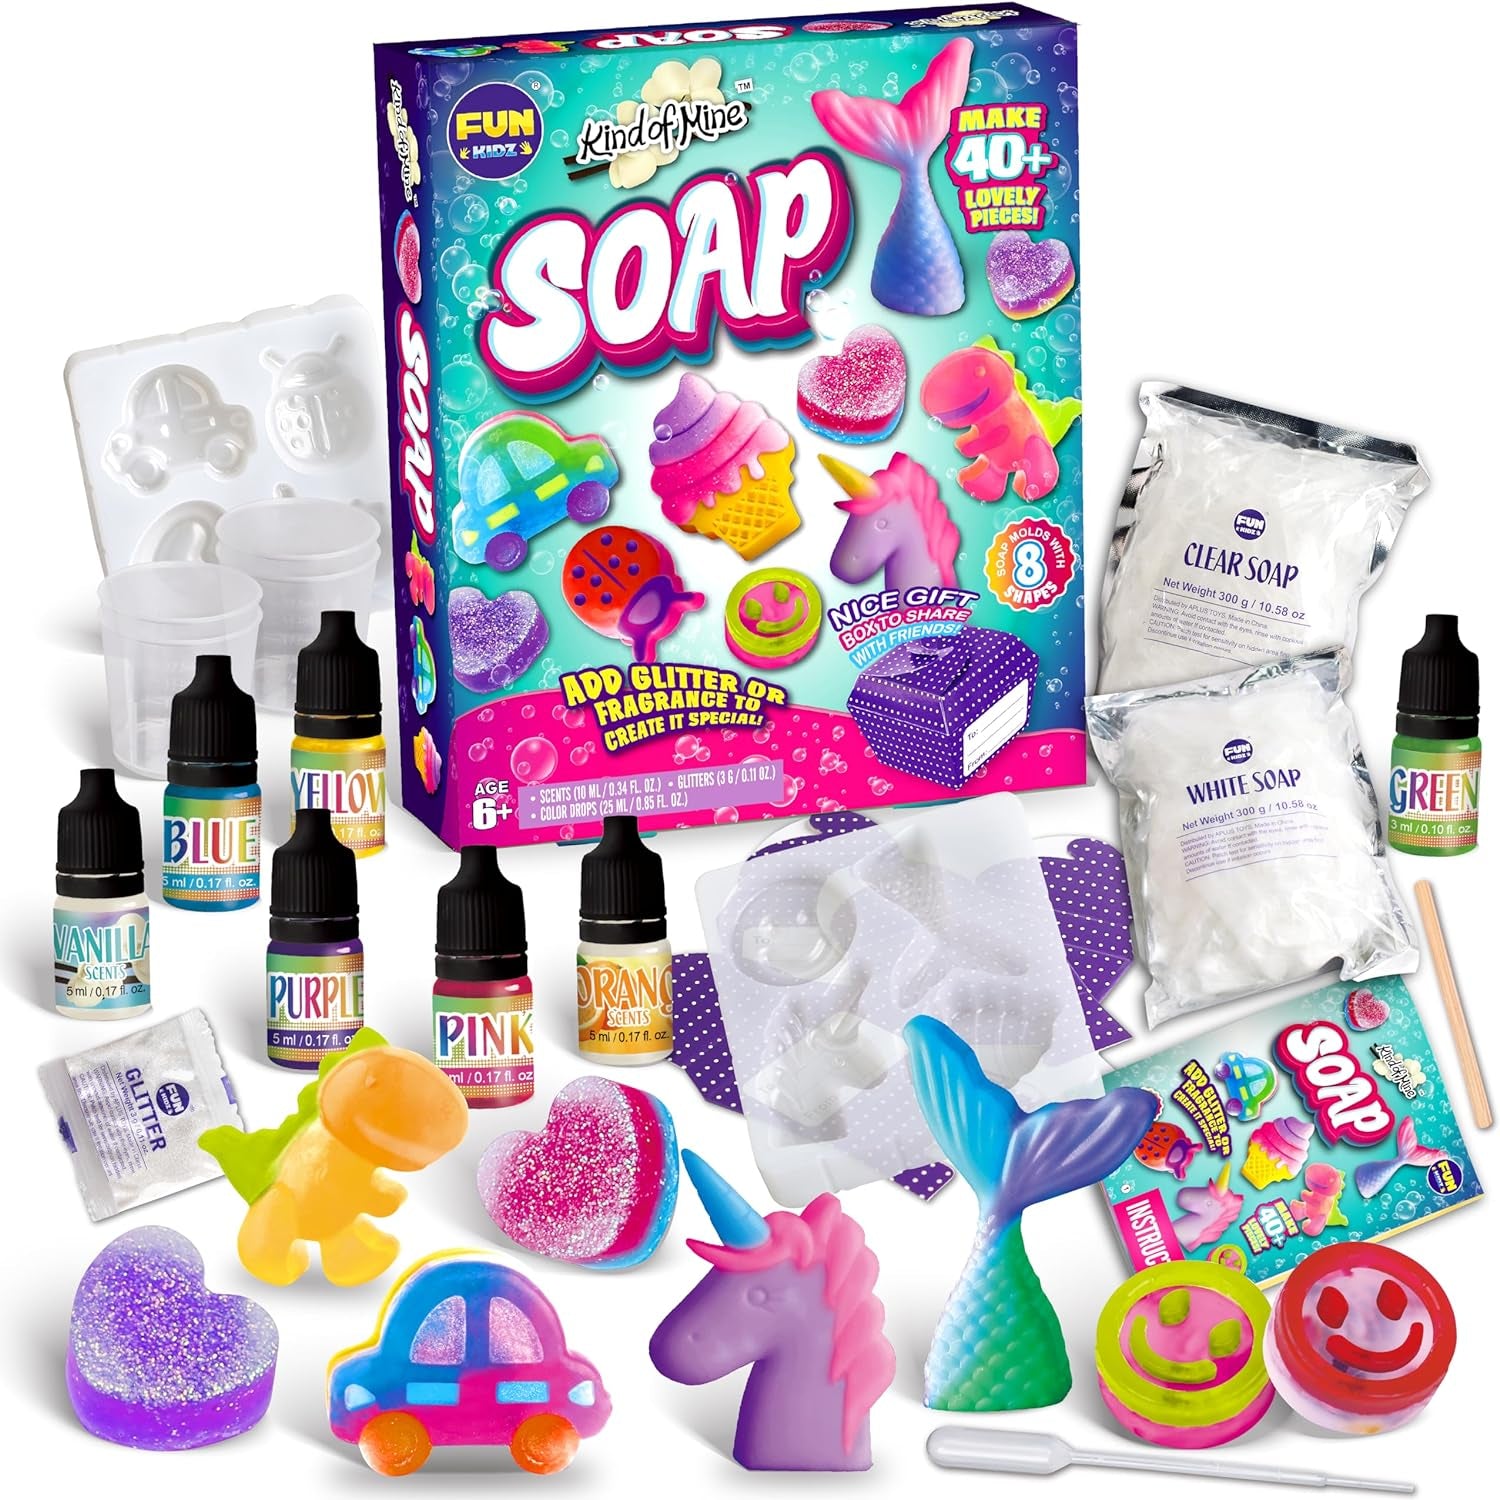 Kids Soap Kit, Funkidz Soap Making Kit for Kids All Ages DIY Crafts Kits STEM Science Activity Gift for Girls and Boys